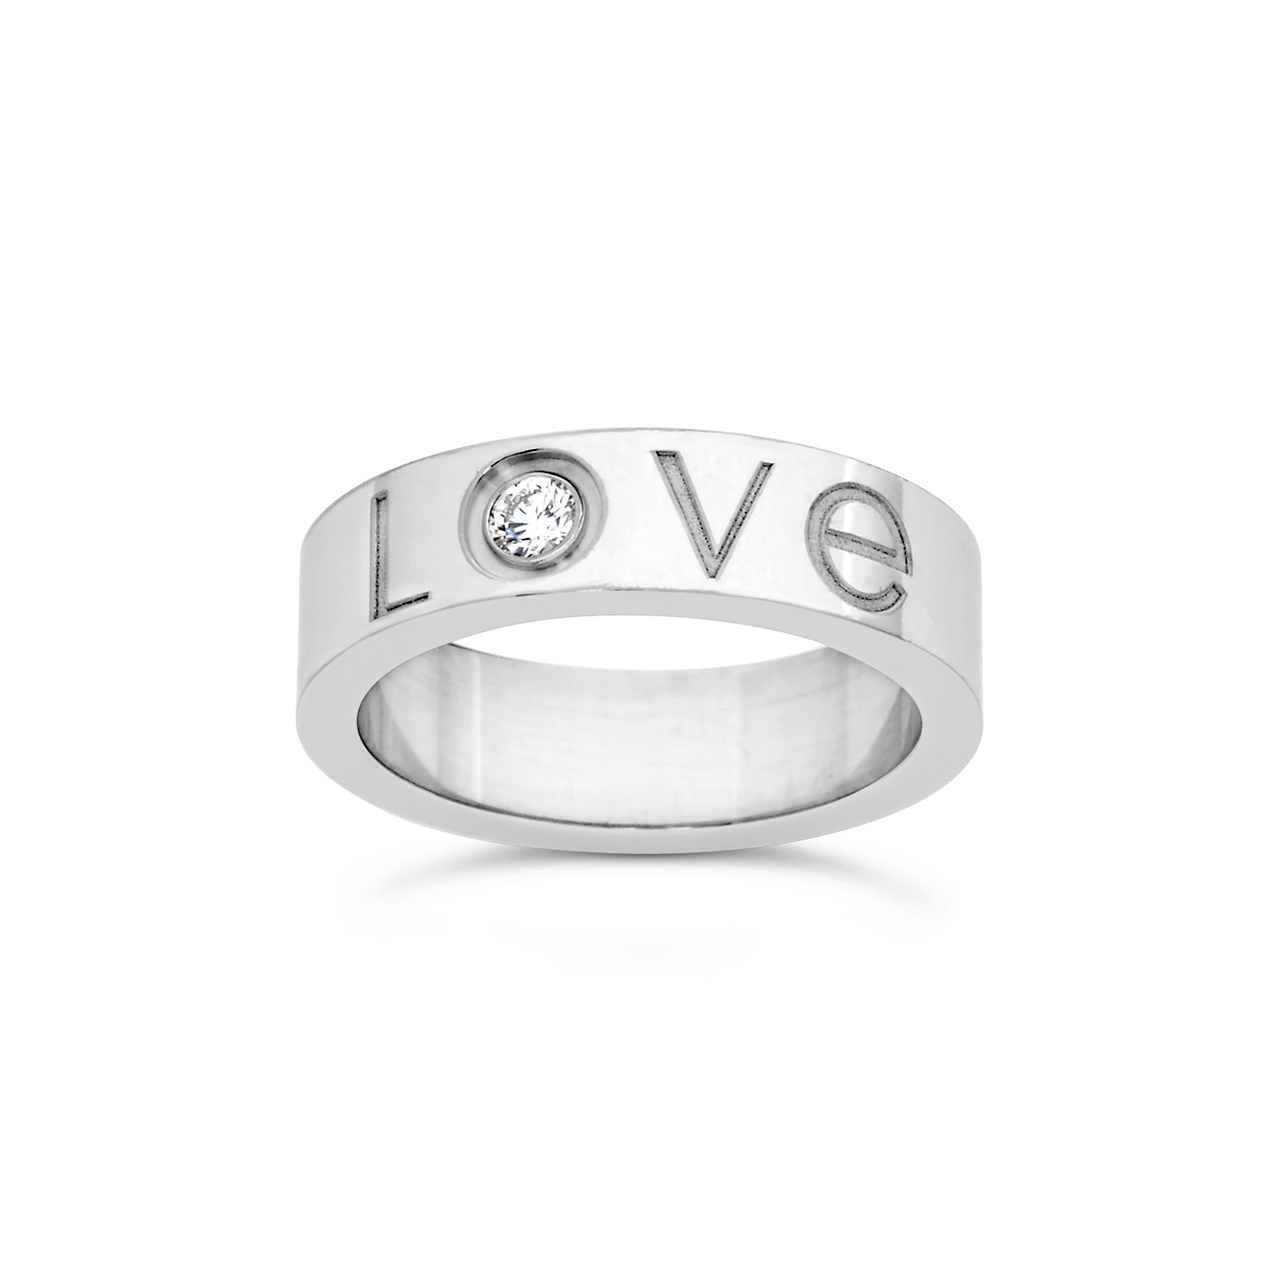 real cartier love ring engraving